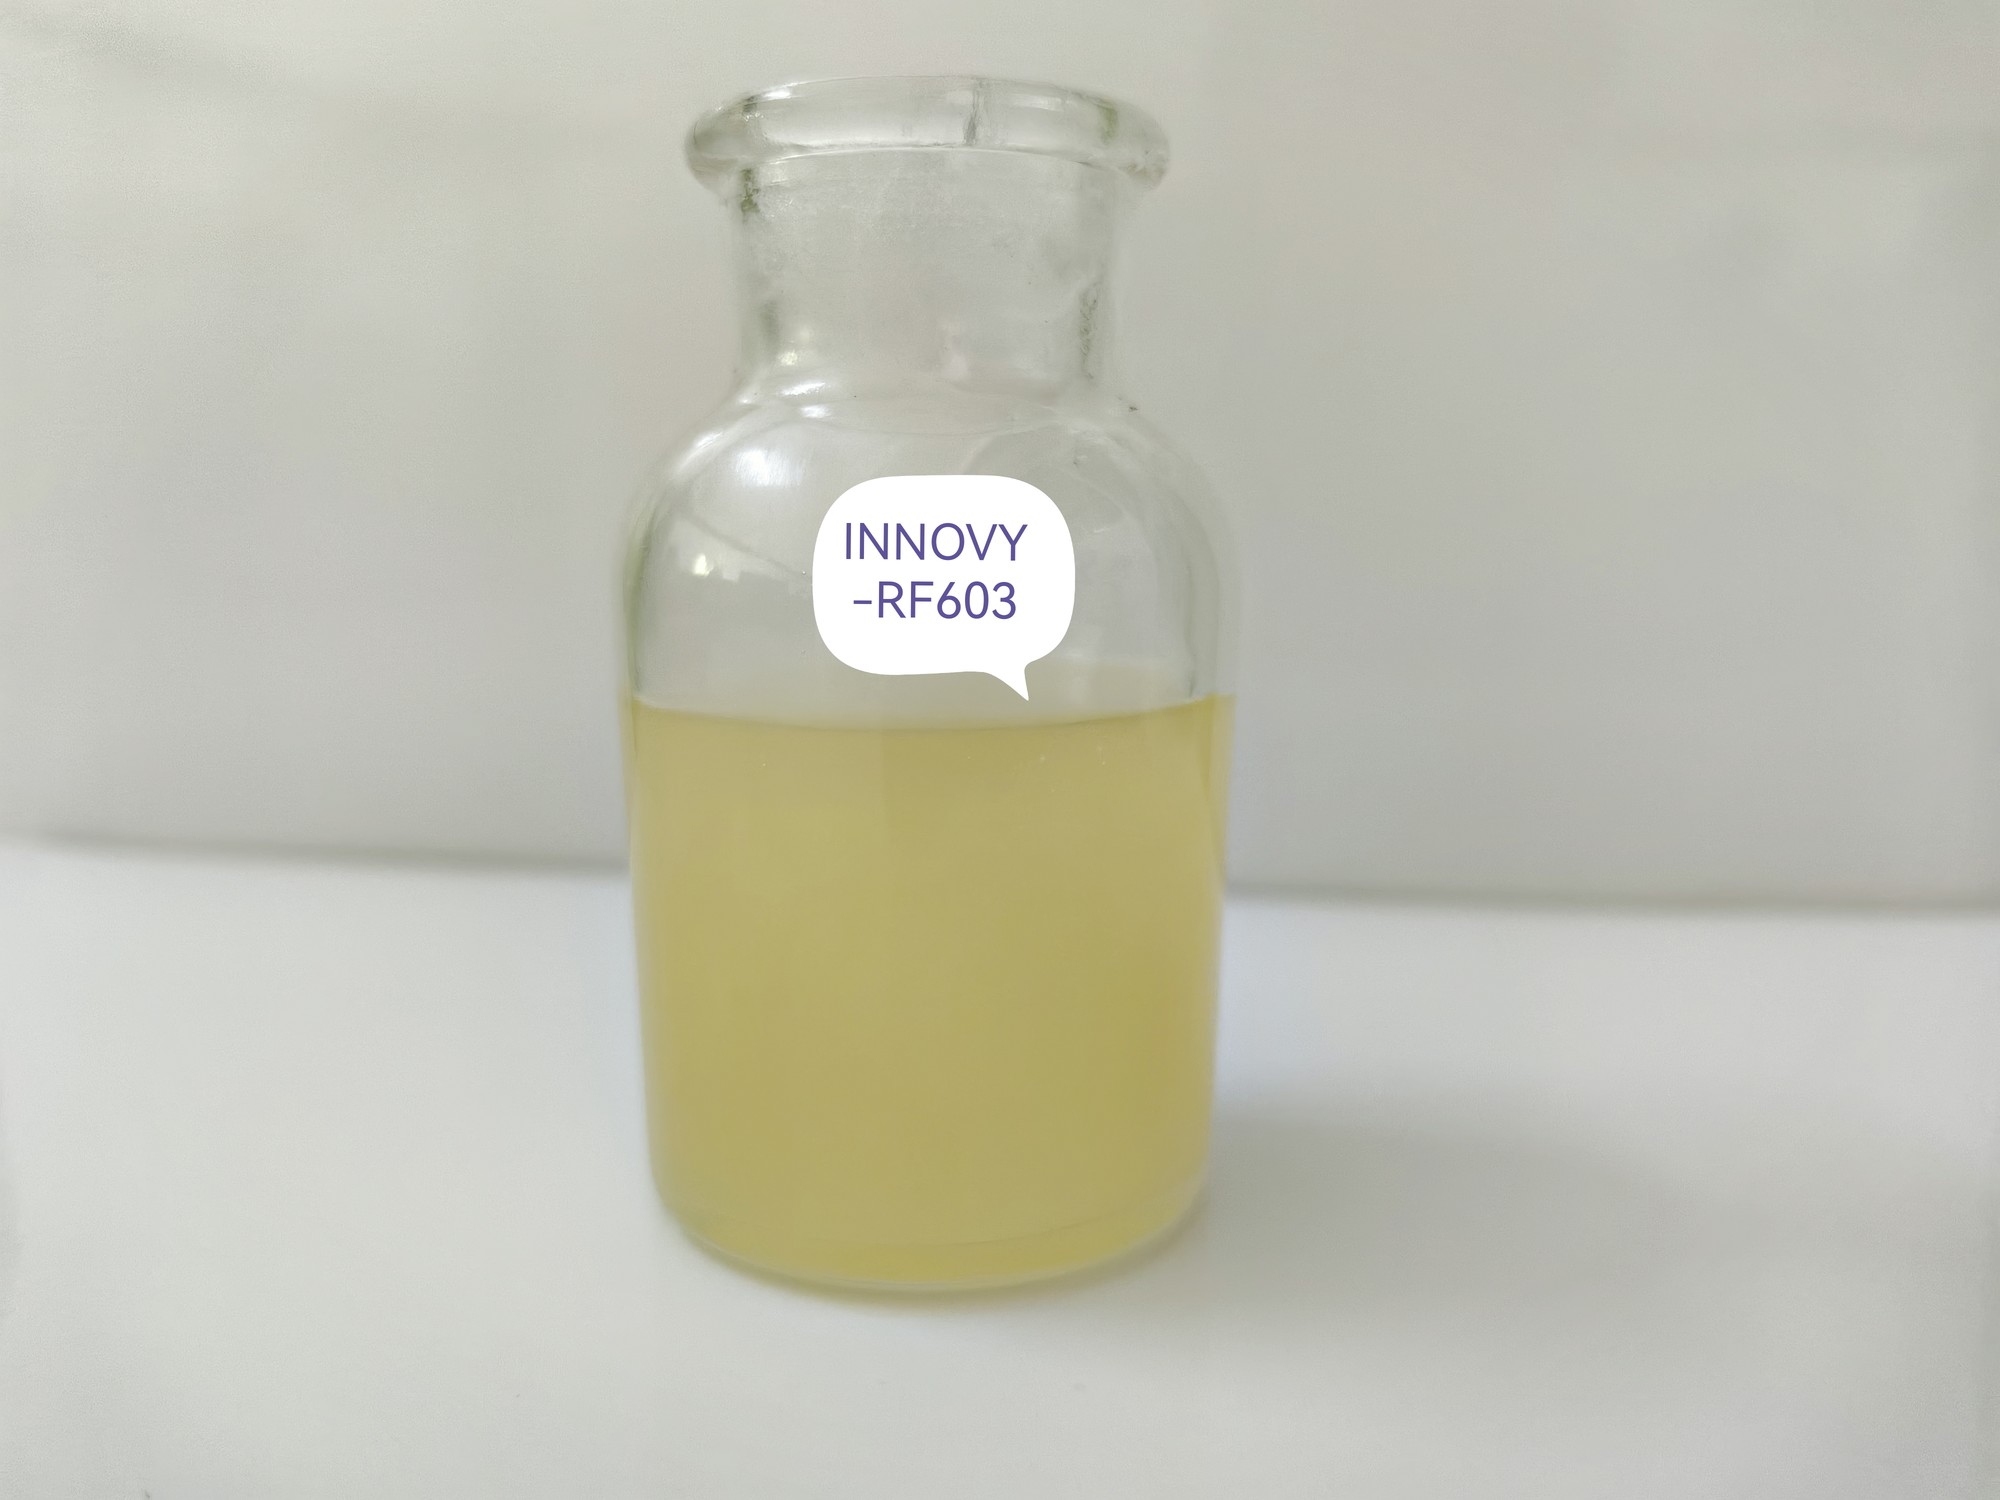 Thick build defoaming agent INNOVY-RF603